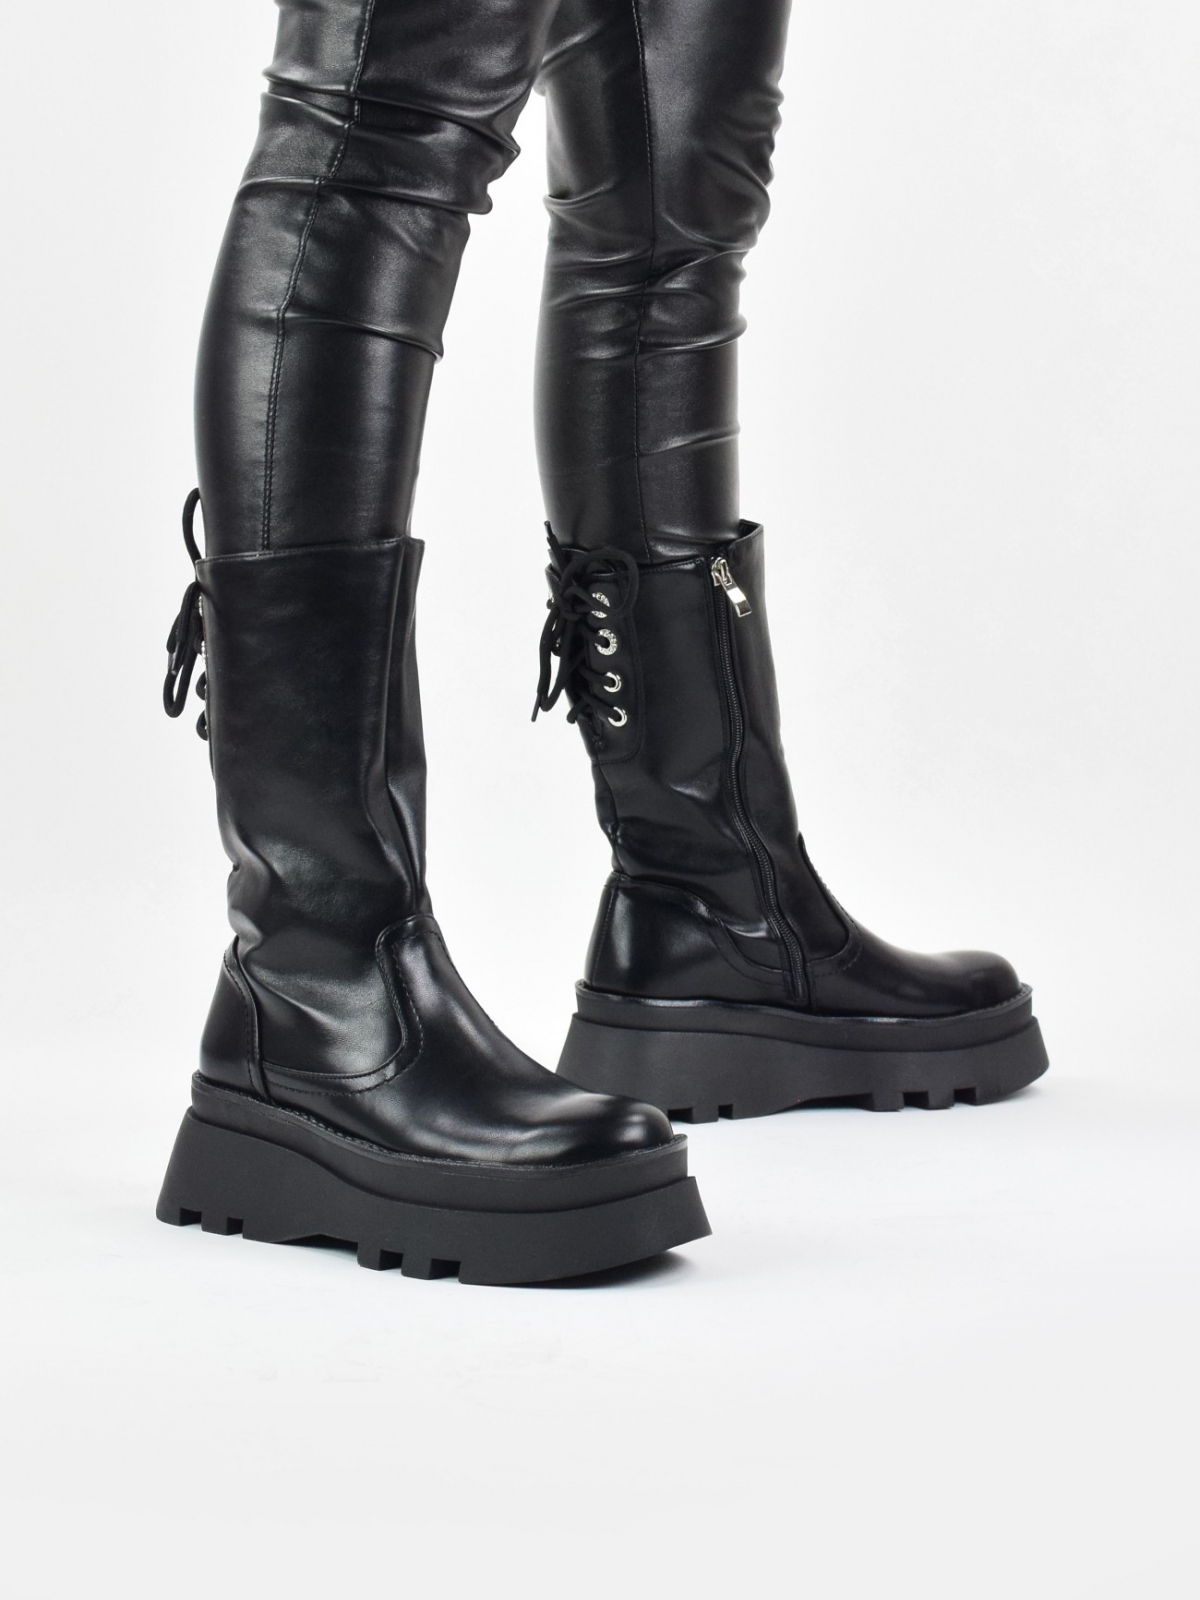 Platform mid calf boots with back lace up detail in black